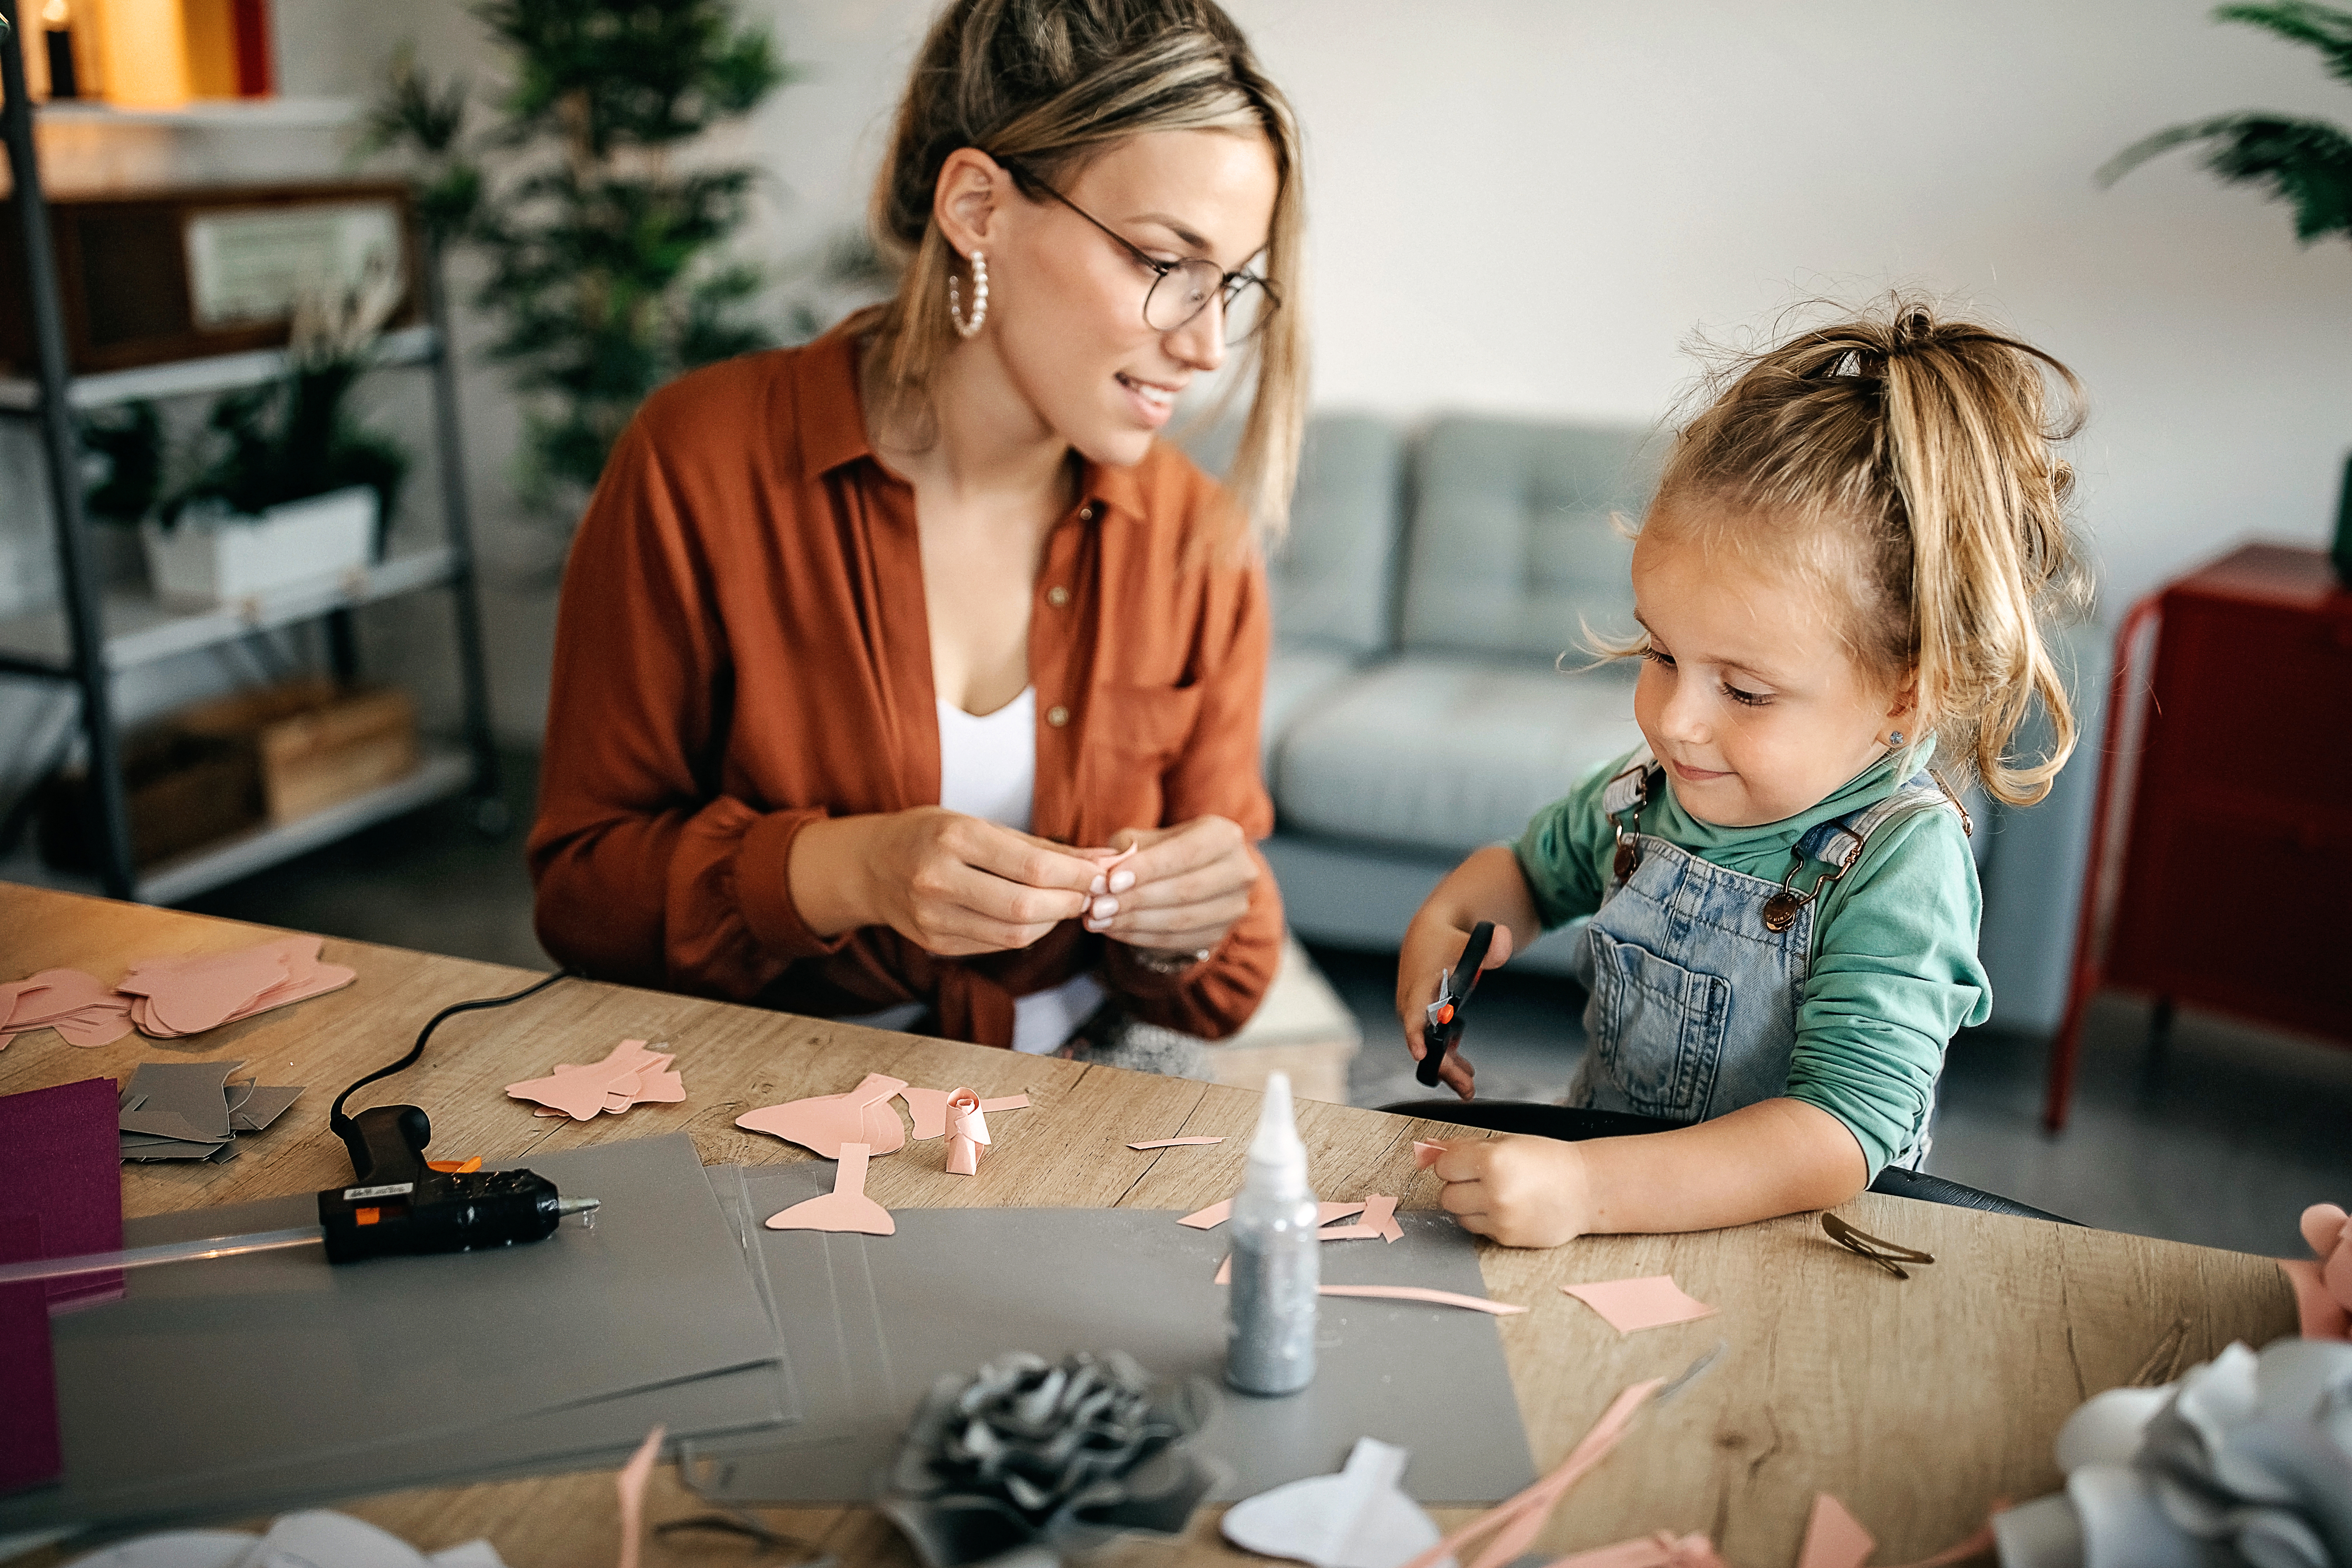 Mom and daughter making a paper craft